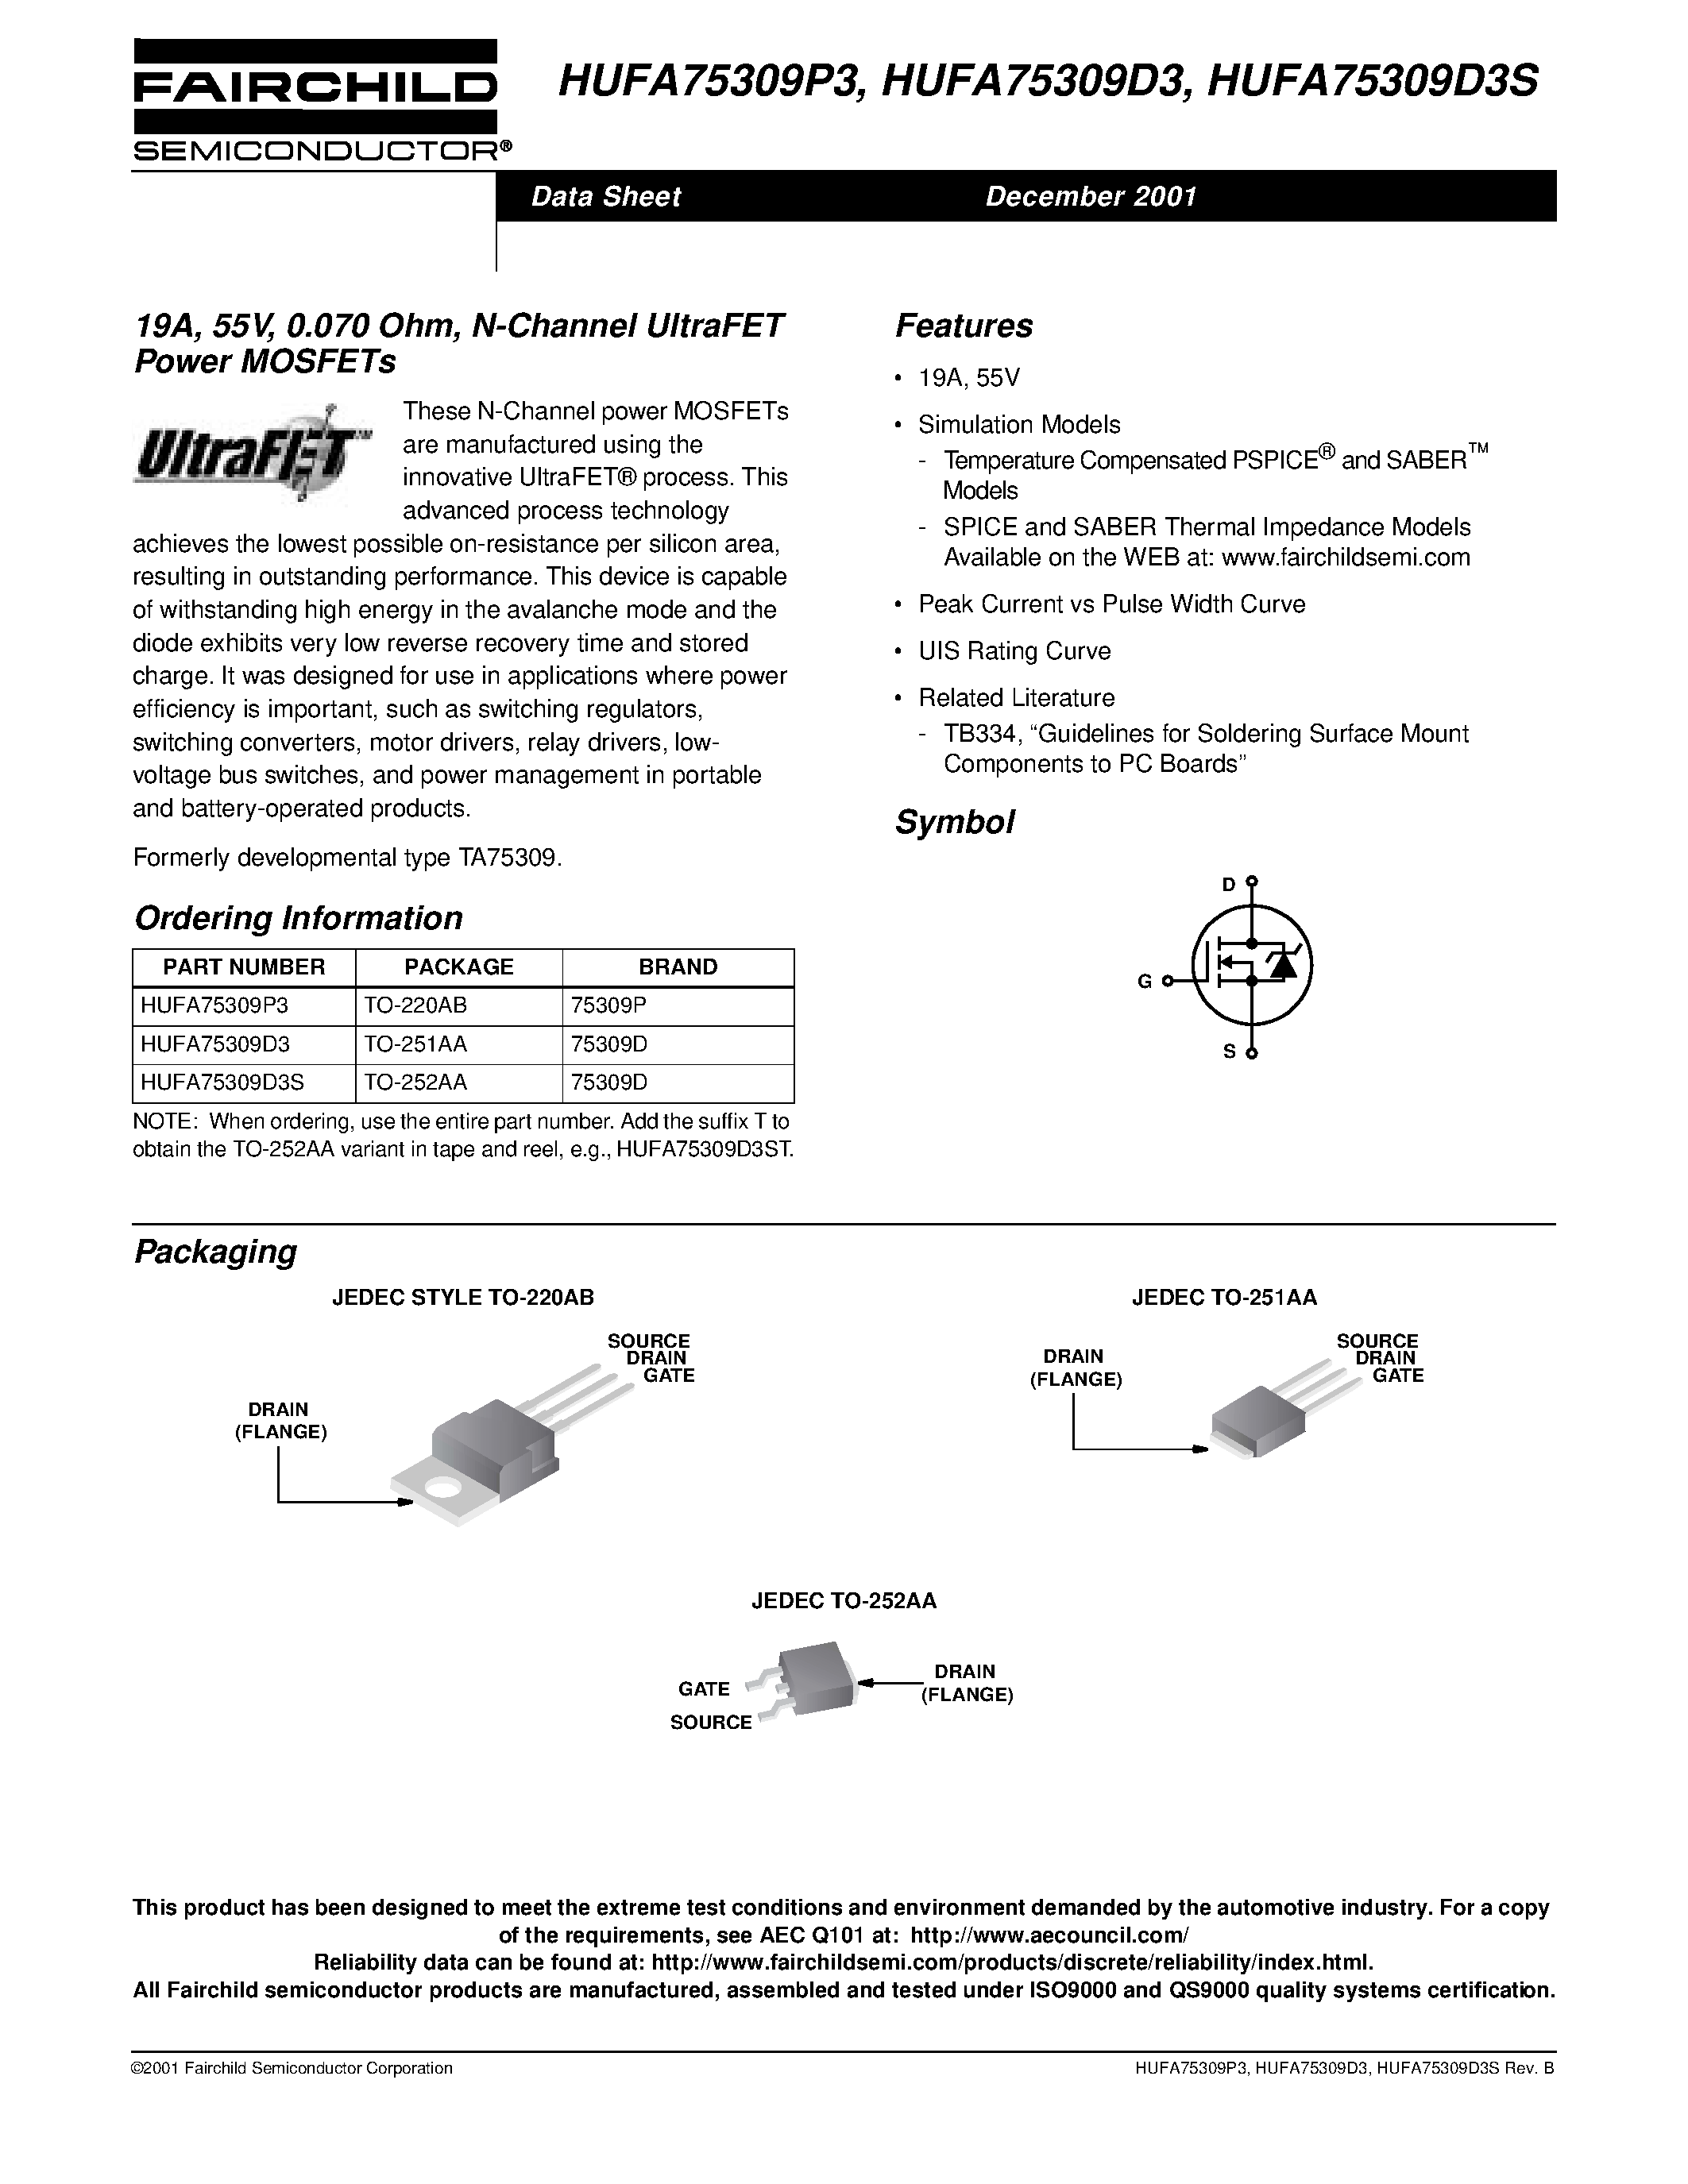 Datasheet HUFA75309P3 - 19A/ 55V/ 0.070 Ohm/ N-Channel UltraFET Power MOSFETs page 1